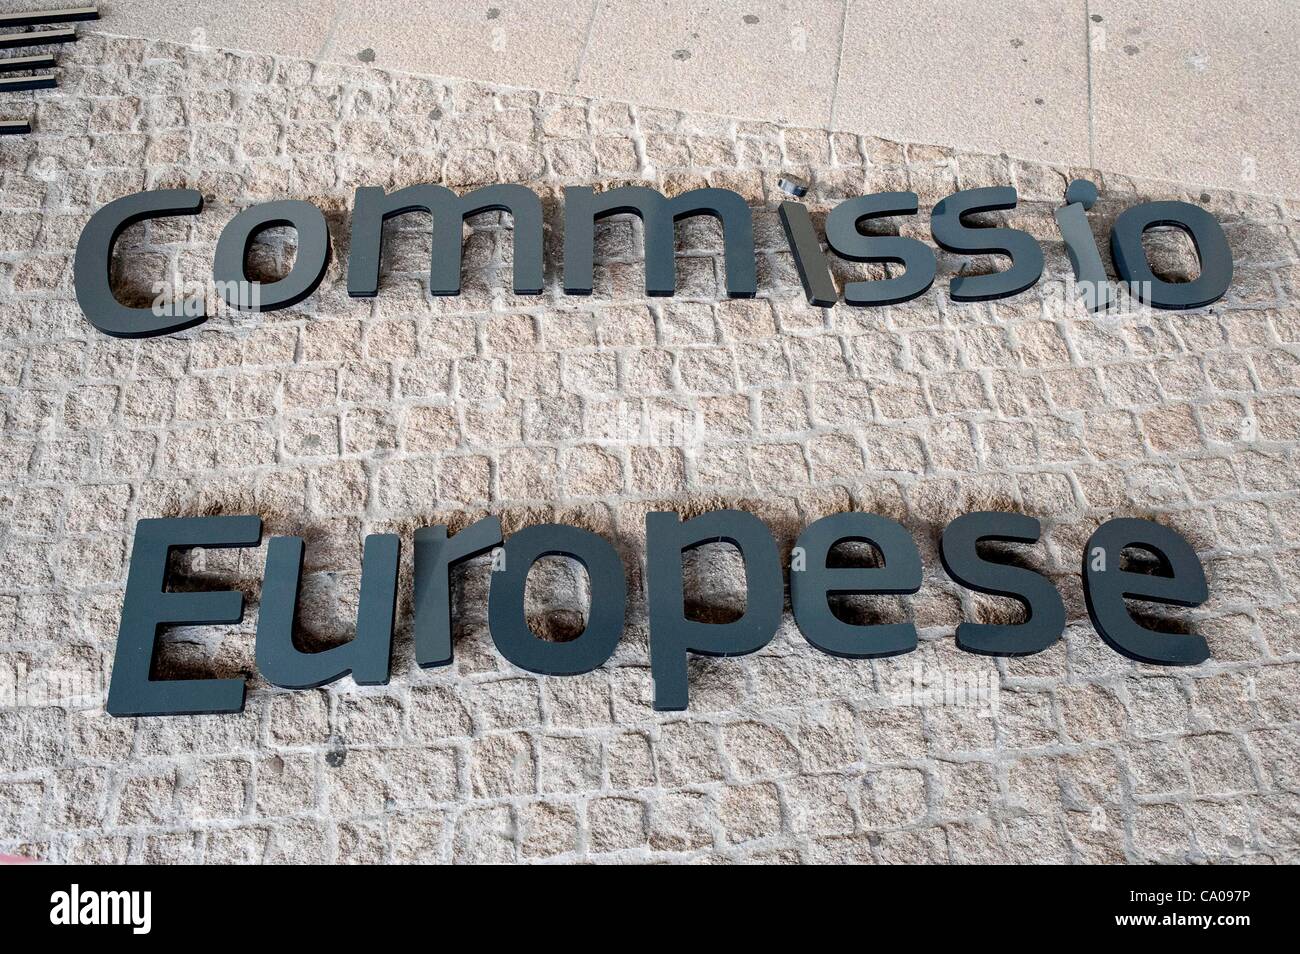 March 12, 2012 - Brussels, Bxl, Belgium - Assembling  of the new inscription Commission Europese on the main entrance to the headquaters of European Commission  in Brussels, Belgium on 12.03.2012 (Credit Image: © Wiktor Dabkowski/ZUMAPRESS.com) Stock Photo